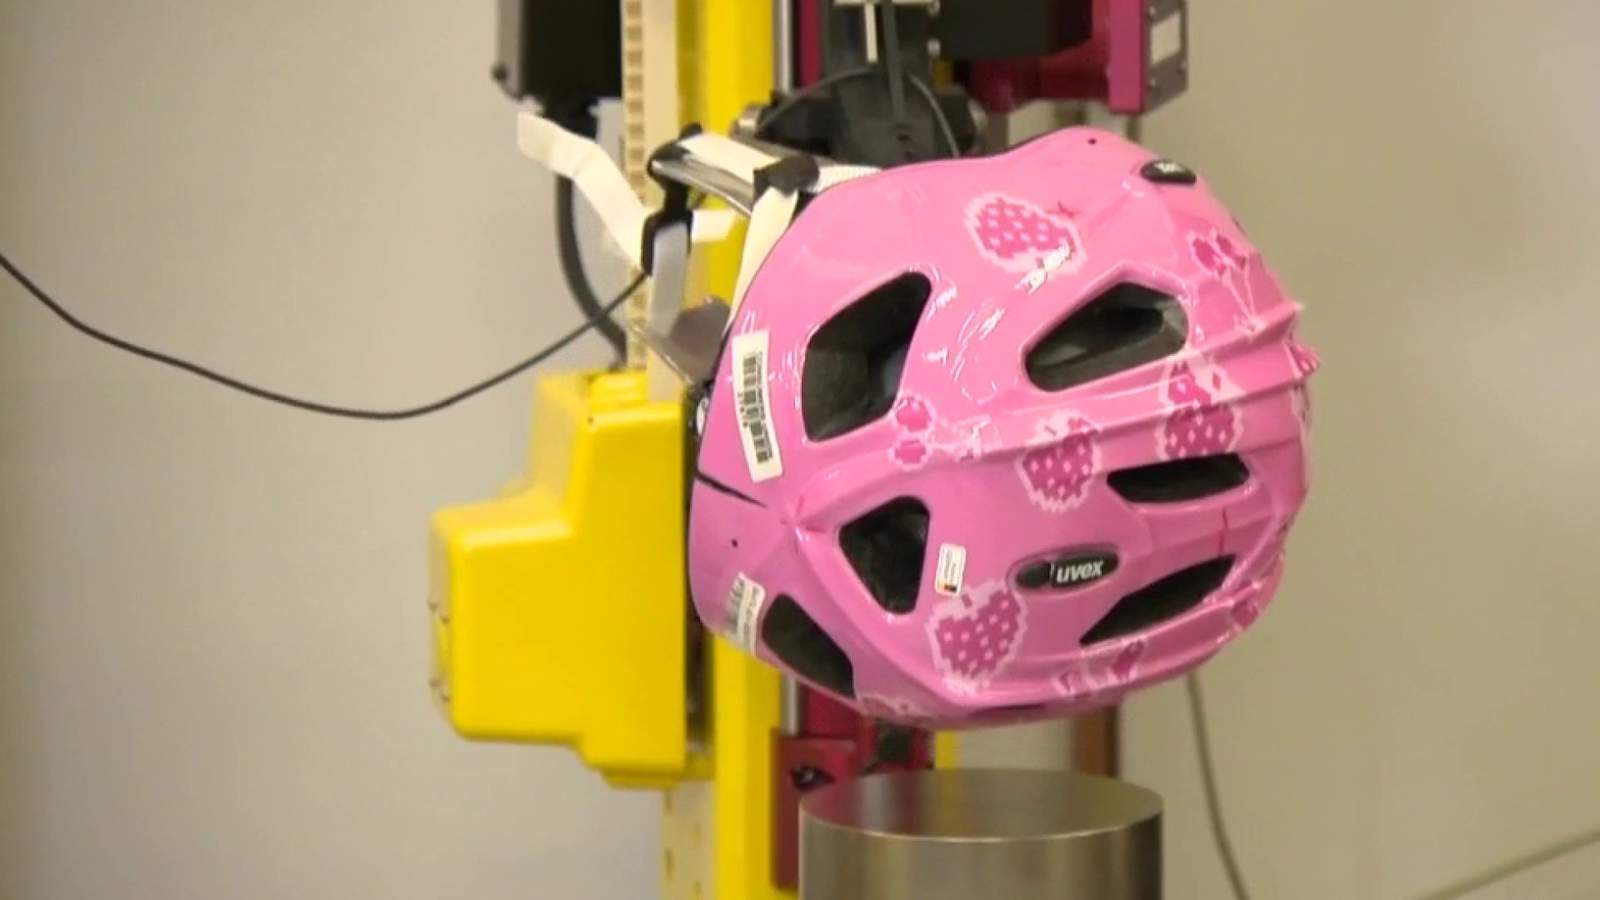 These bike helmets protect best, tests show